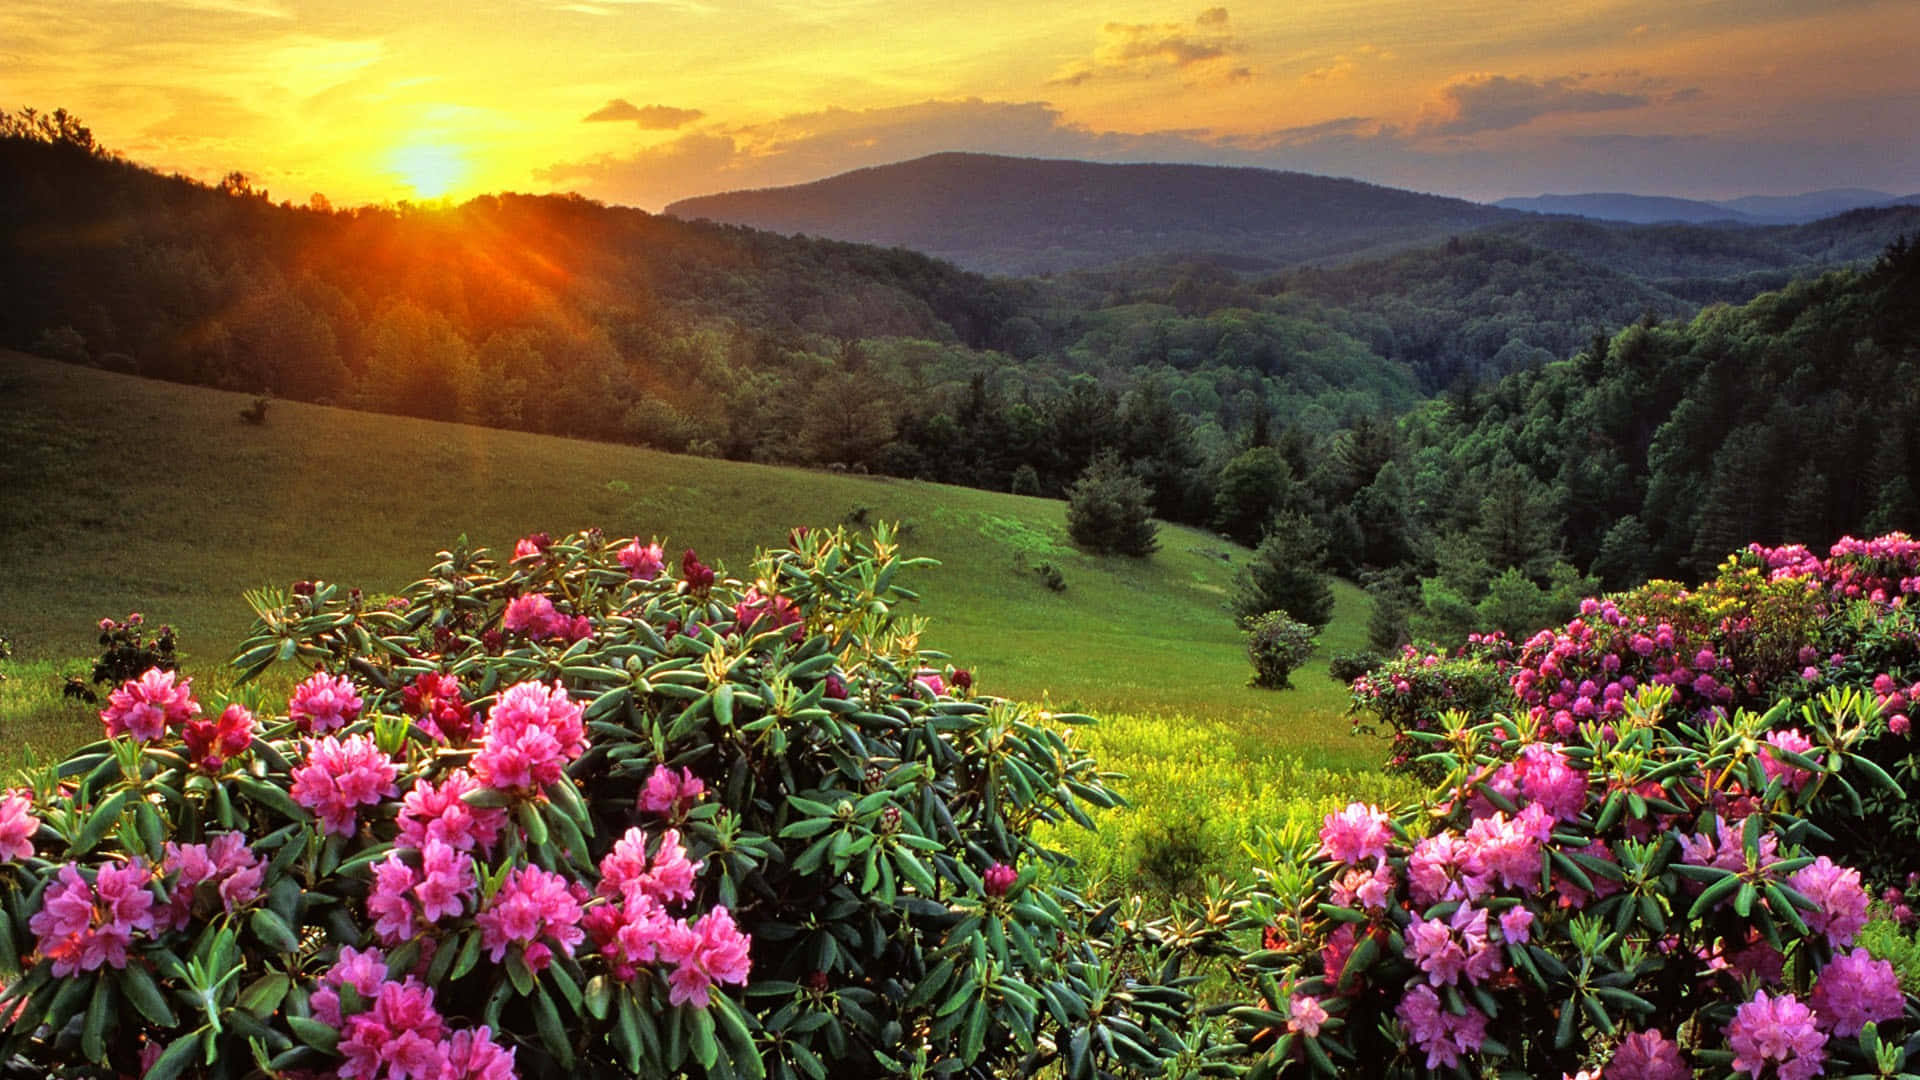 A Beautiful Sunset Over A Mountain With Pink Flowers Wallpaper